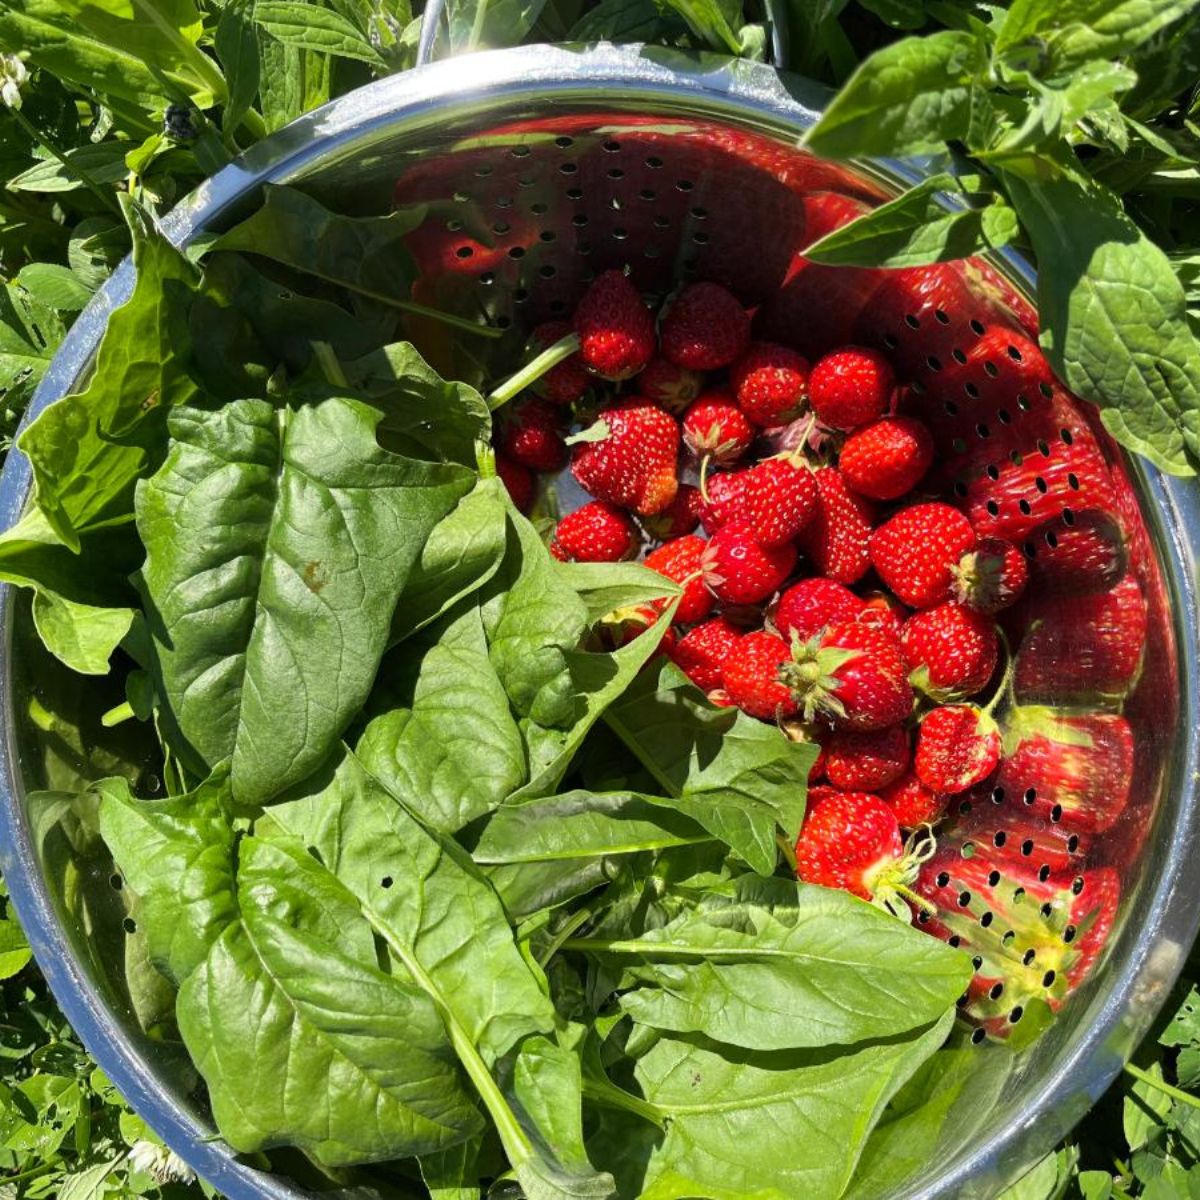 Freshly harvested spinach and strawberries in a bowl.